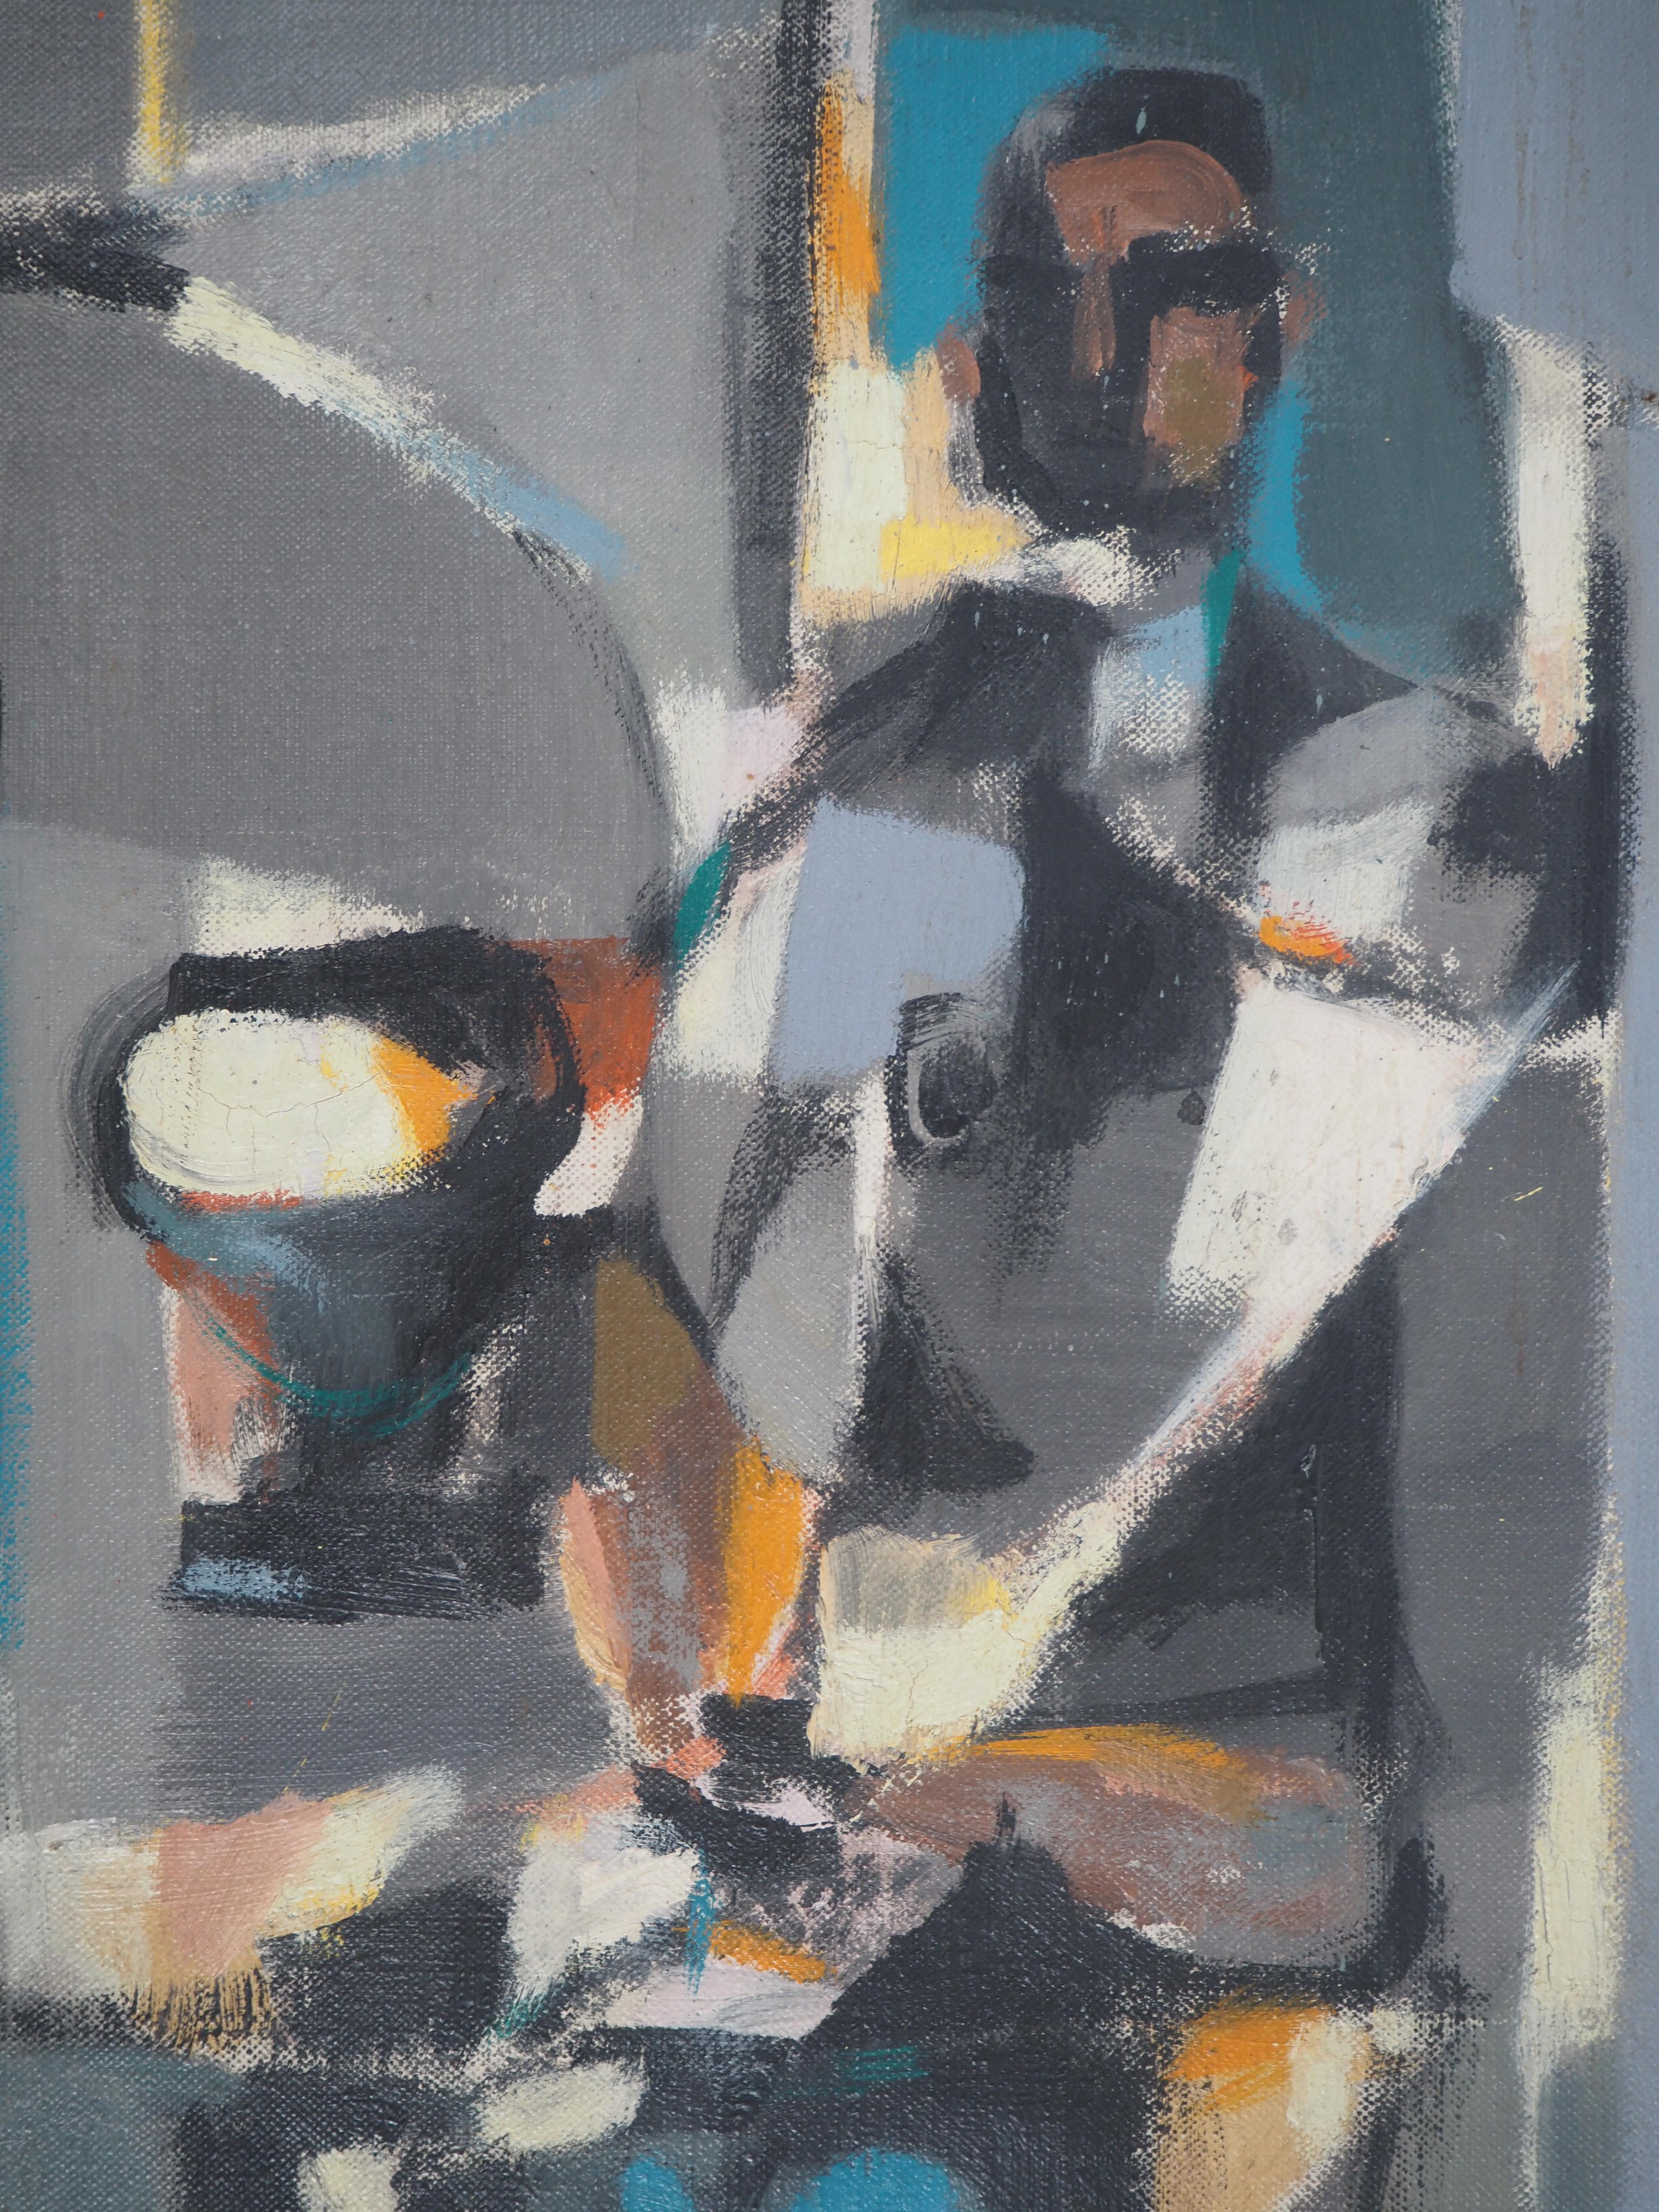 Man Reading a Newspaper on the Cafe Terrace - Original Oil on canvas, Signed - Modern Painting by Marcel Mouly